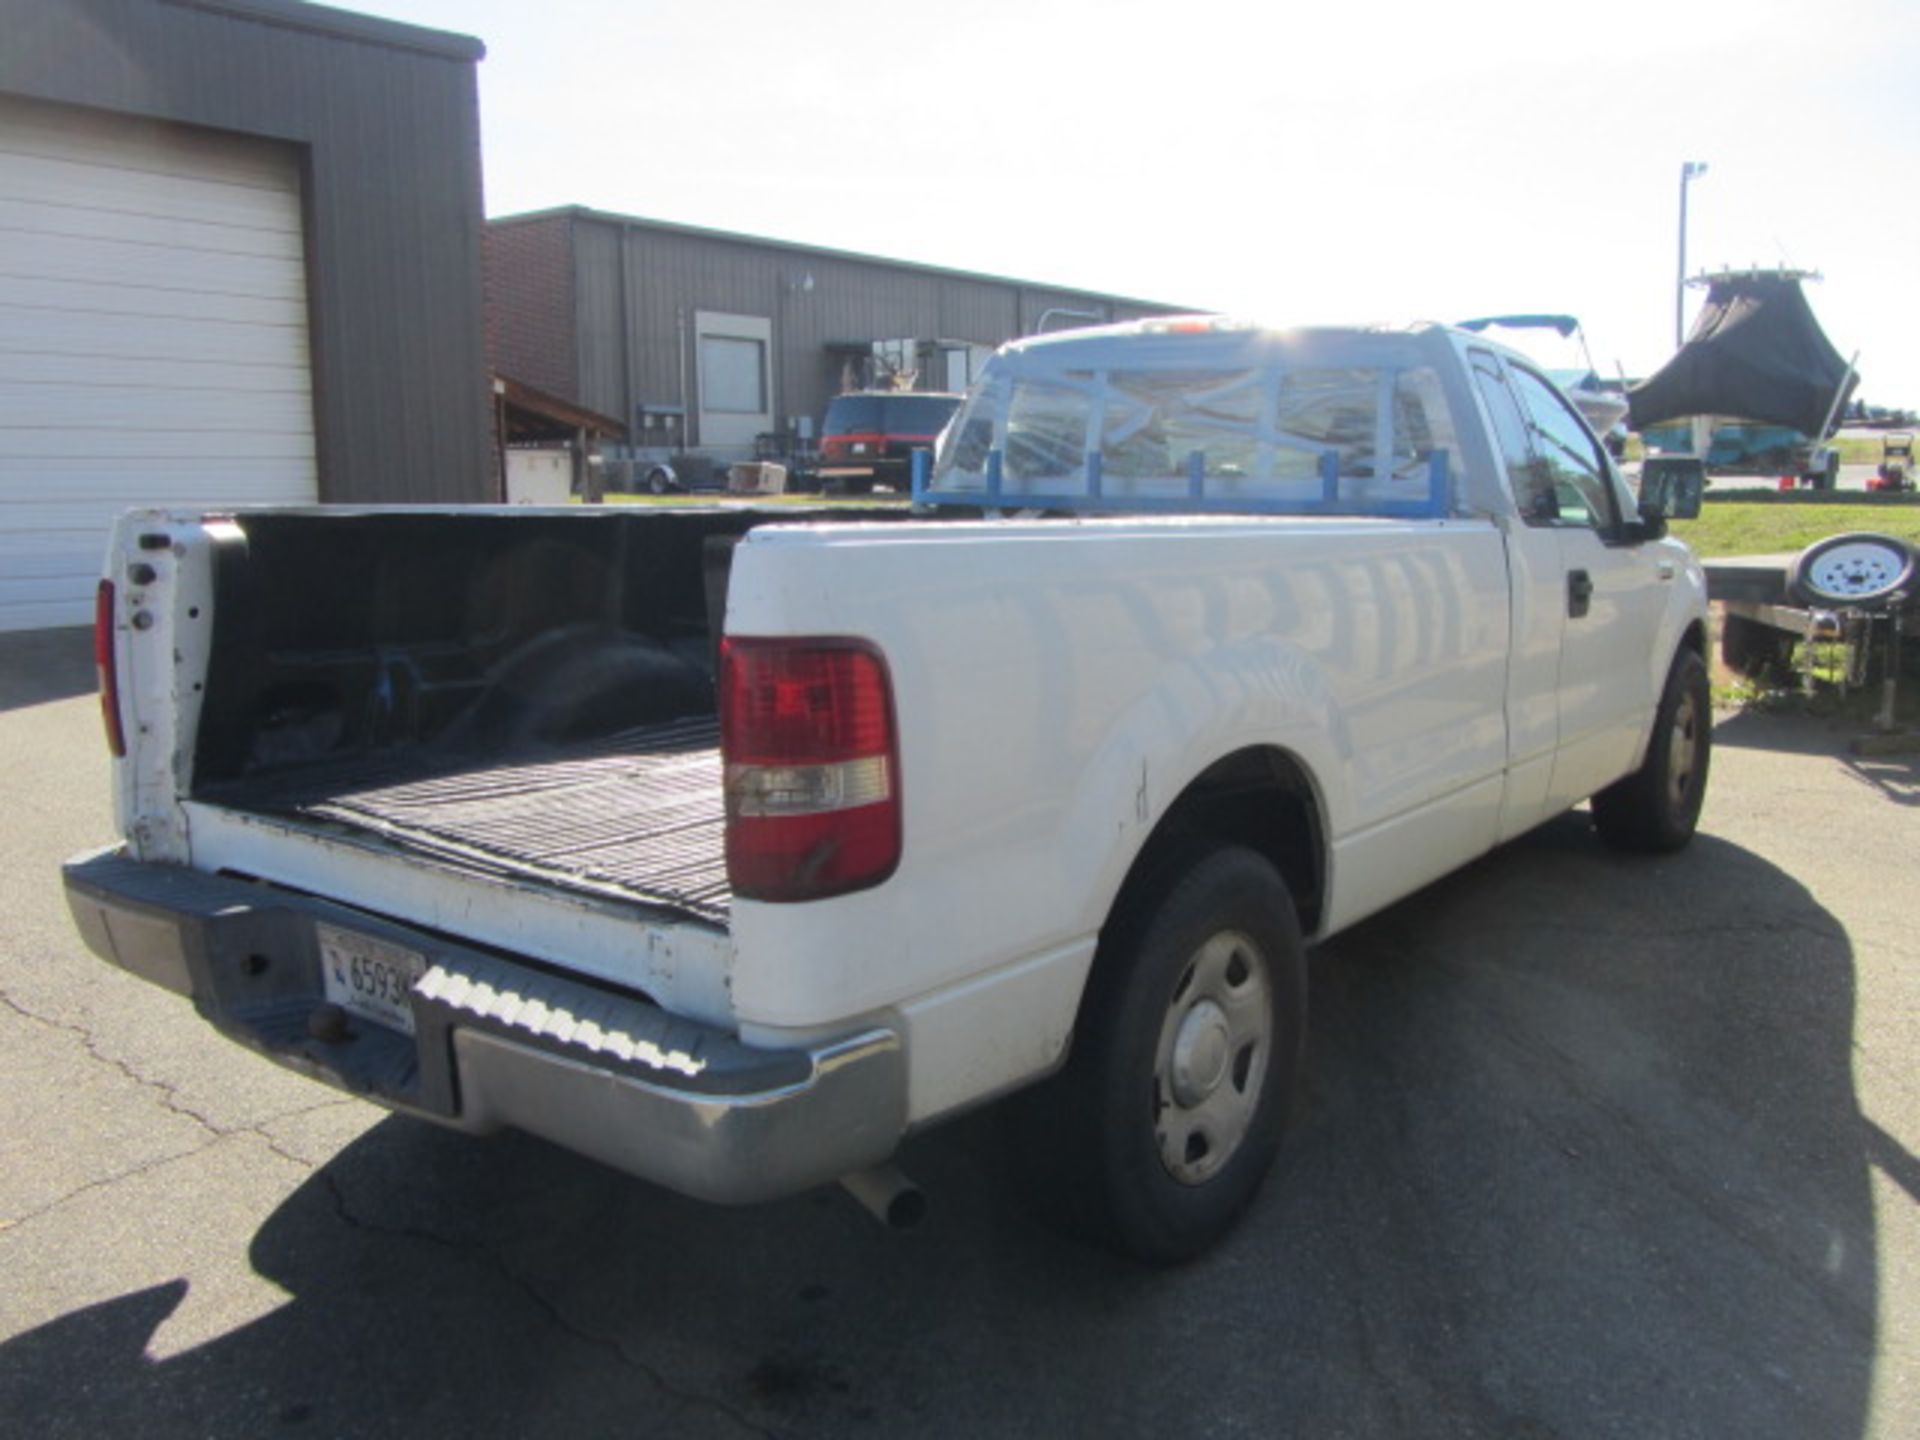 Ford F-150 XLT Triton Pick-Up Truck with 8' Bed, Automatic Transmission, AC & Heat, vin: - Image 8 of 8